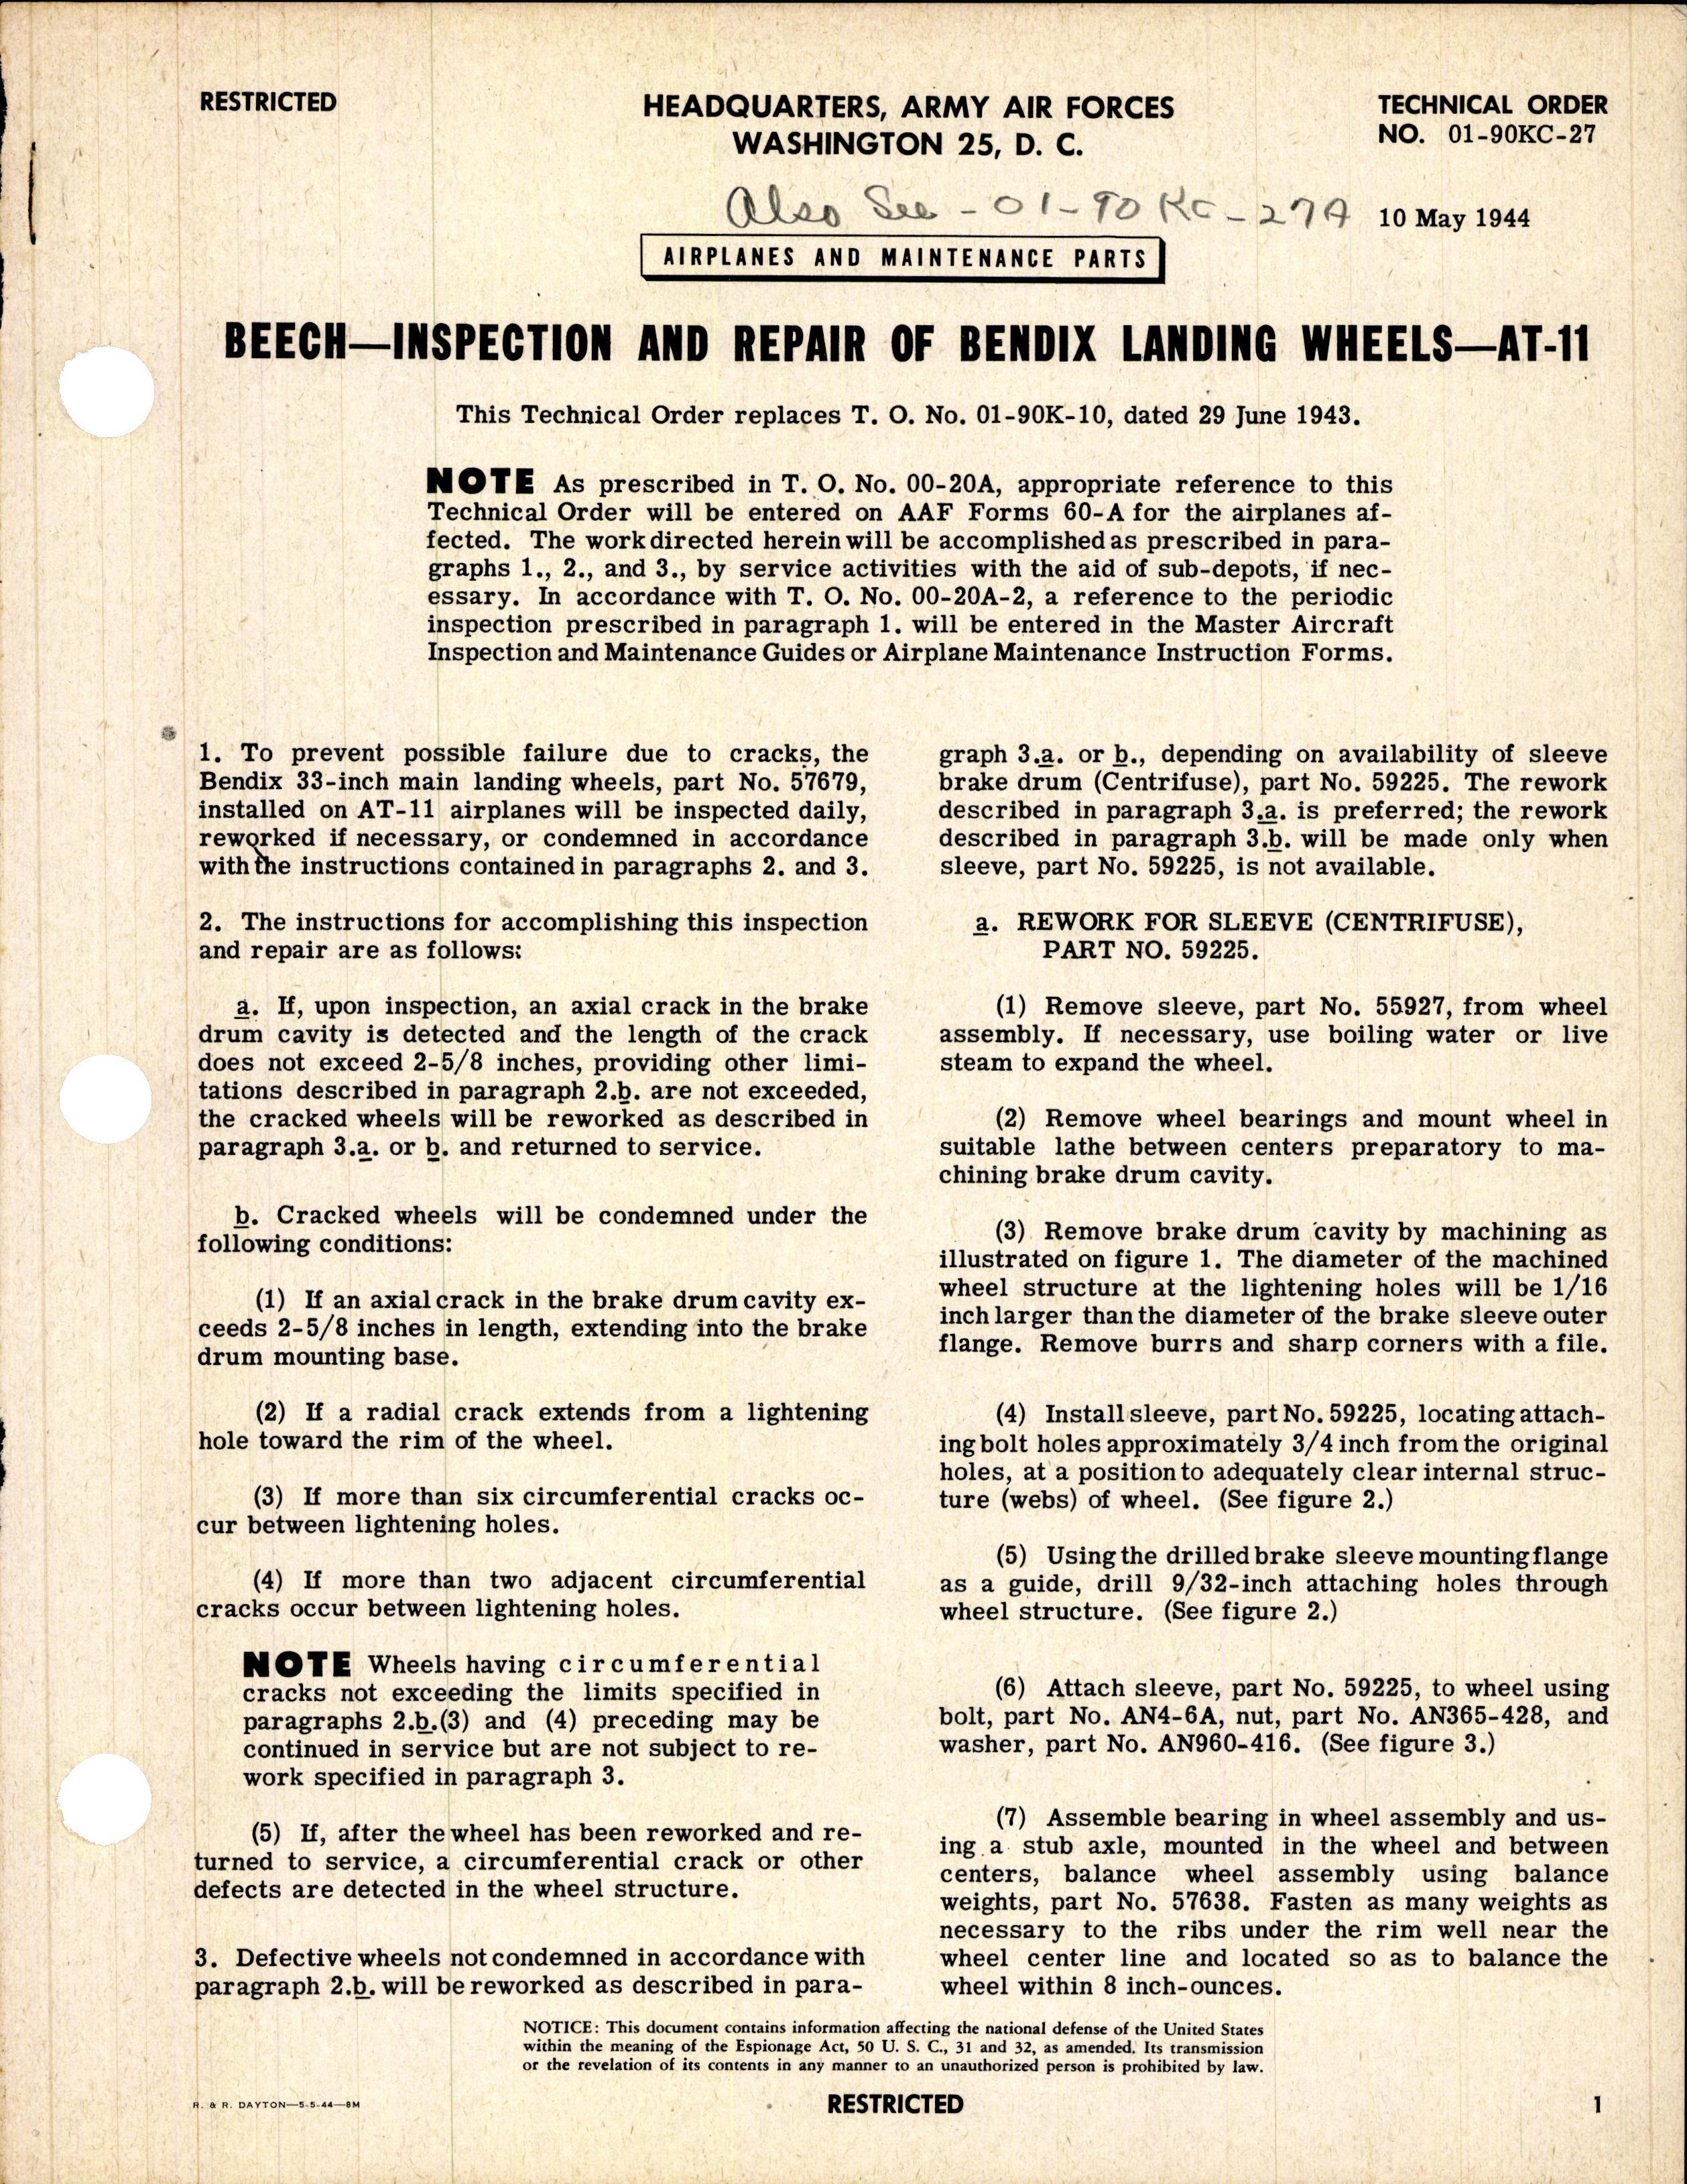 Sample page 1 from AirCorps Library document: Inspection and Repair of Bendix Landing Wheels for AT-11